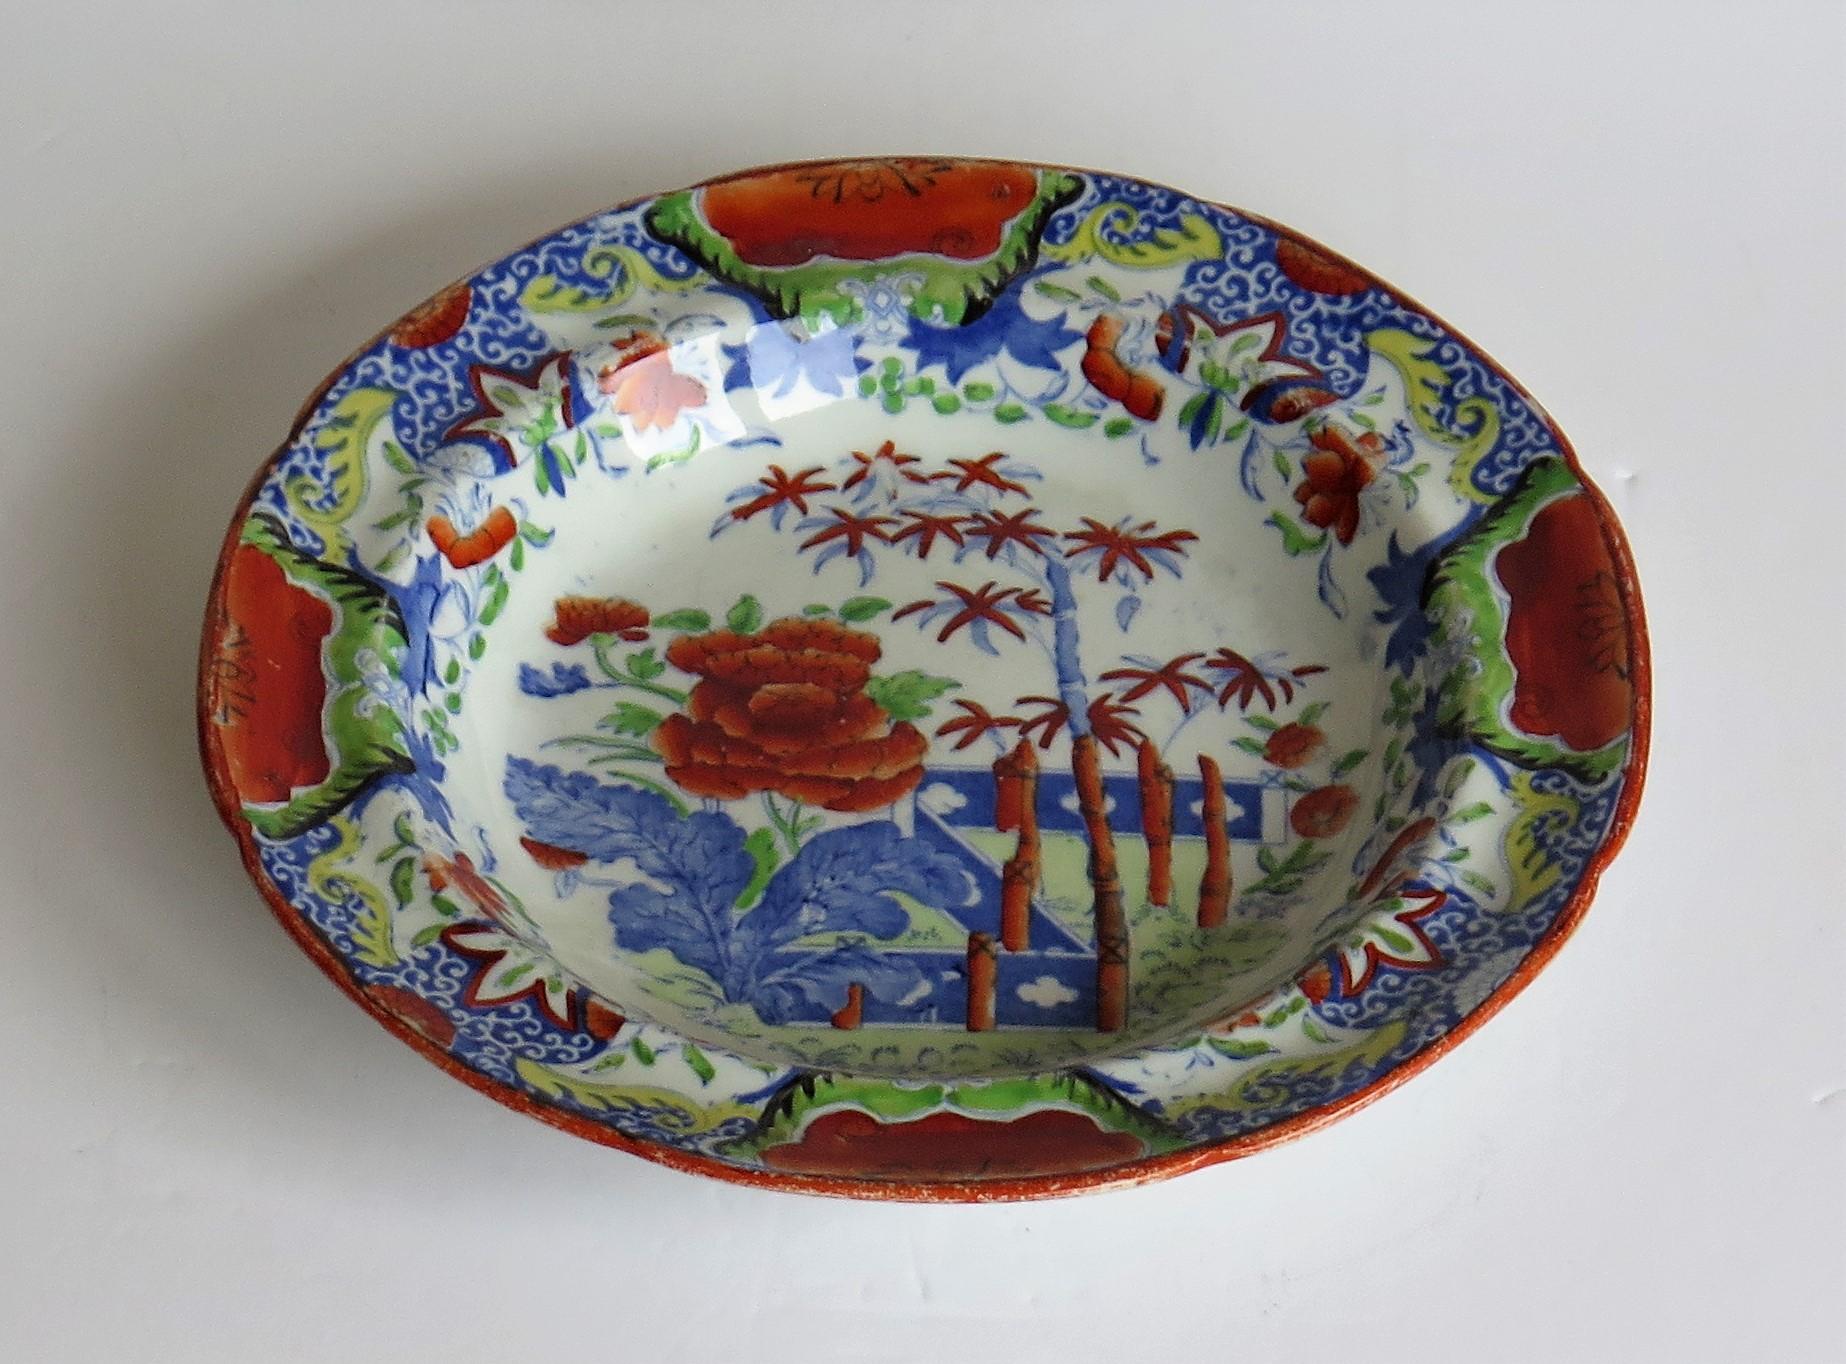 This is an early 19th century Ironstone soup bowl produced by Mason's Ironstone in a distinctive Chinoiserie pattern, fully marked and dating to circa 1825.

This soup bowl or deep plate is decorated in a striking chinoiserie pattern comprising a